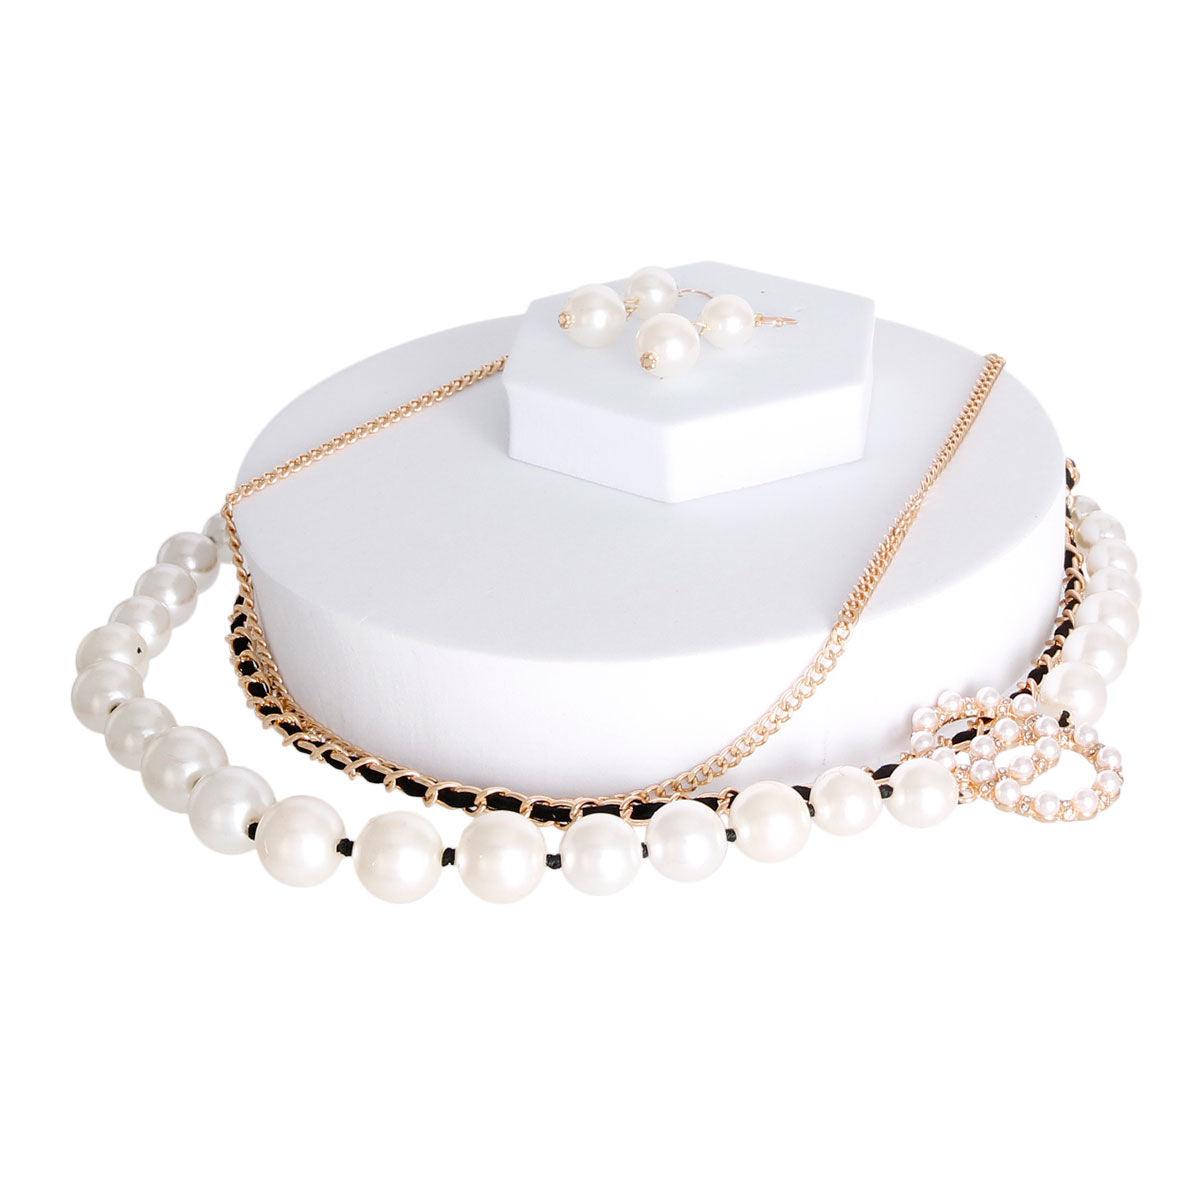 Discover the Perfect Layered Necklace Set for You - Mix it Up!